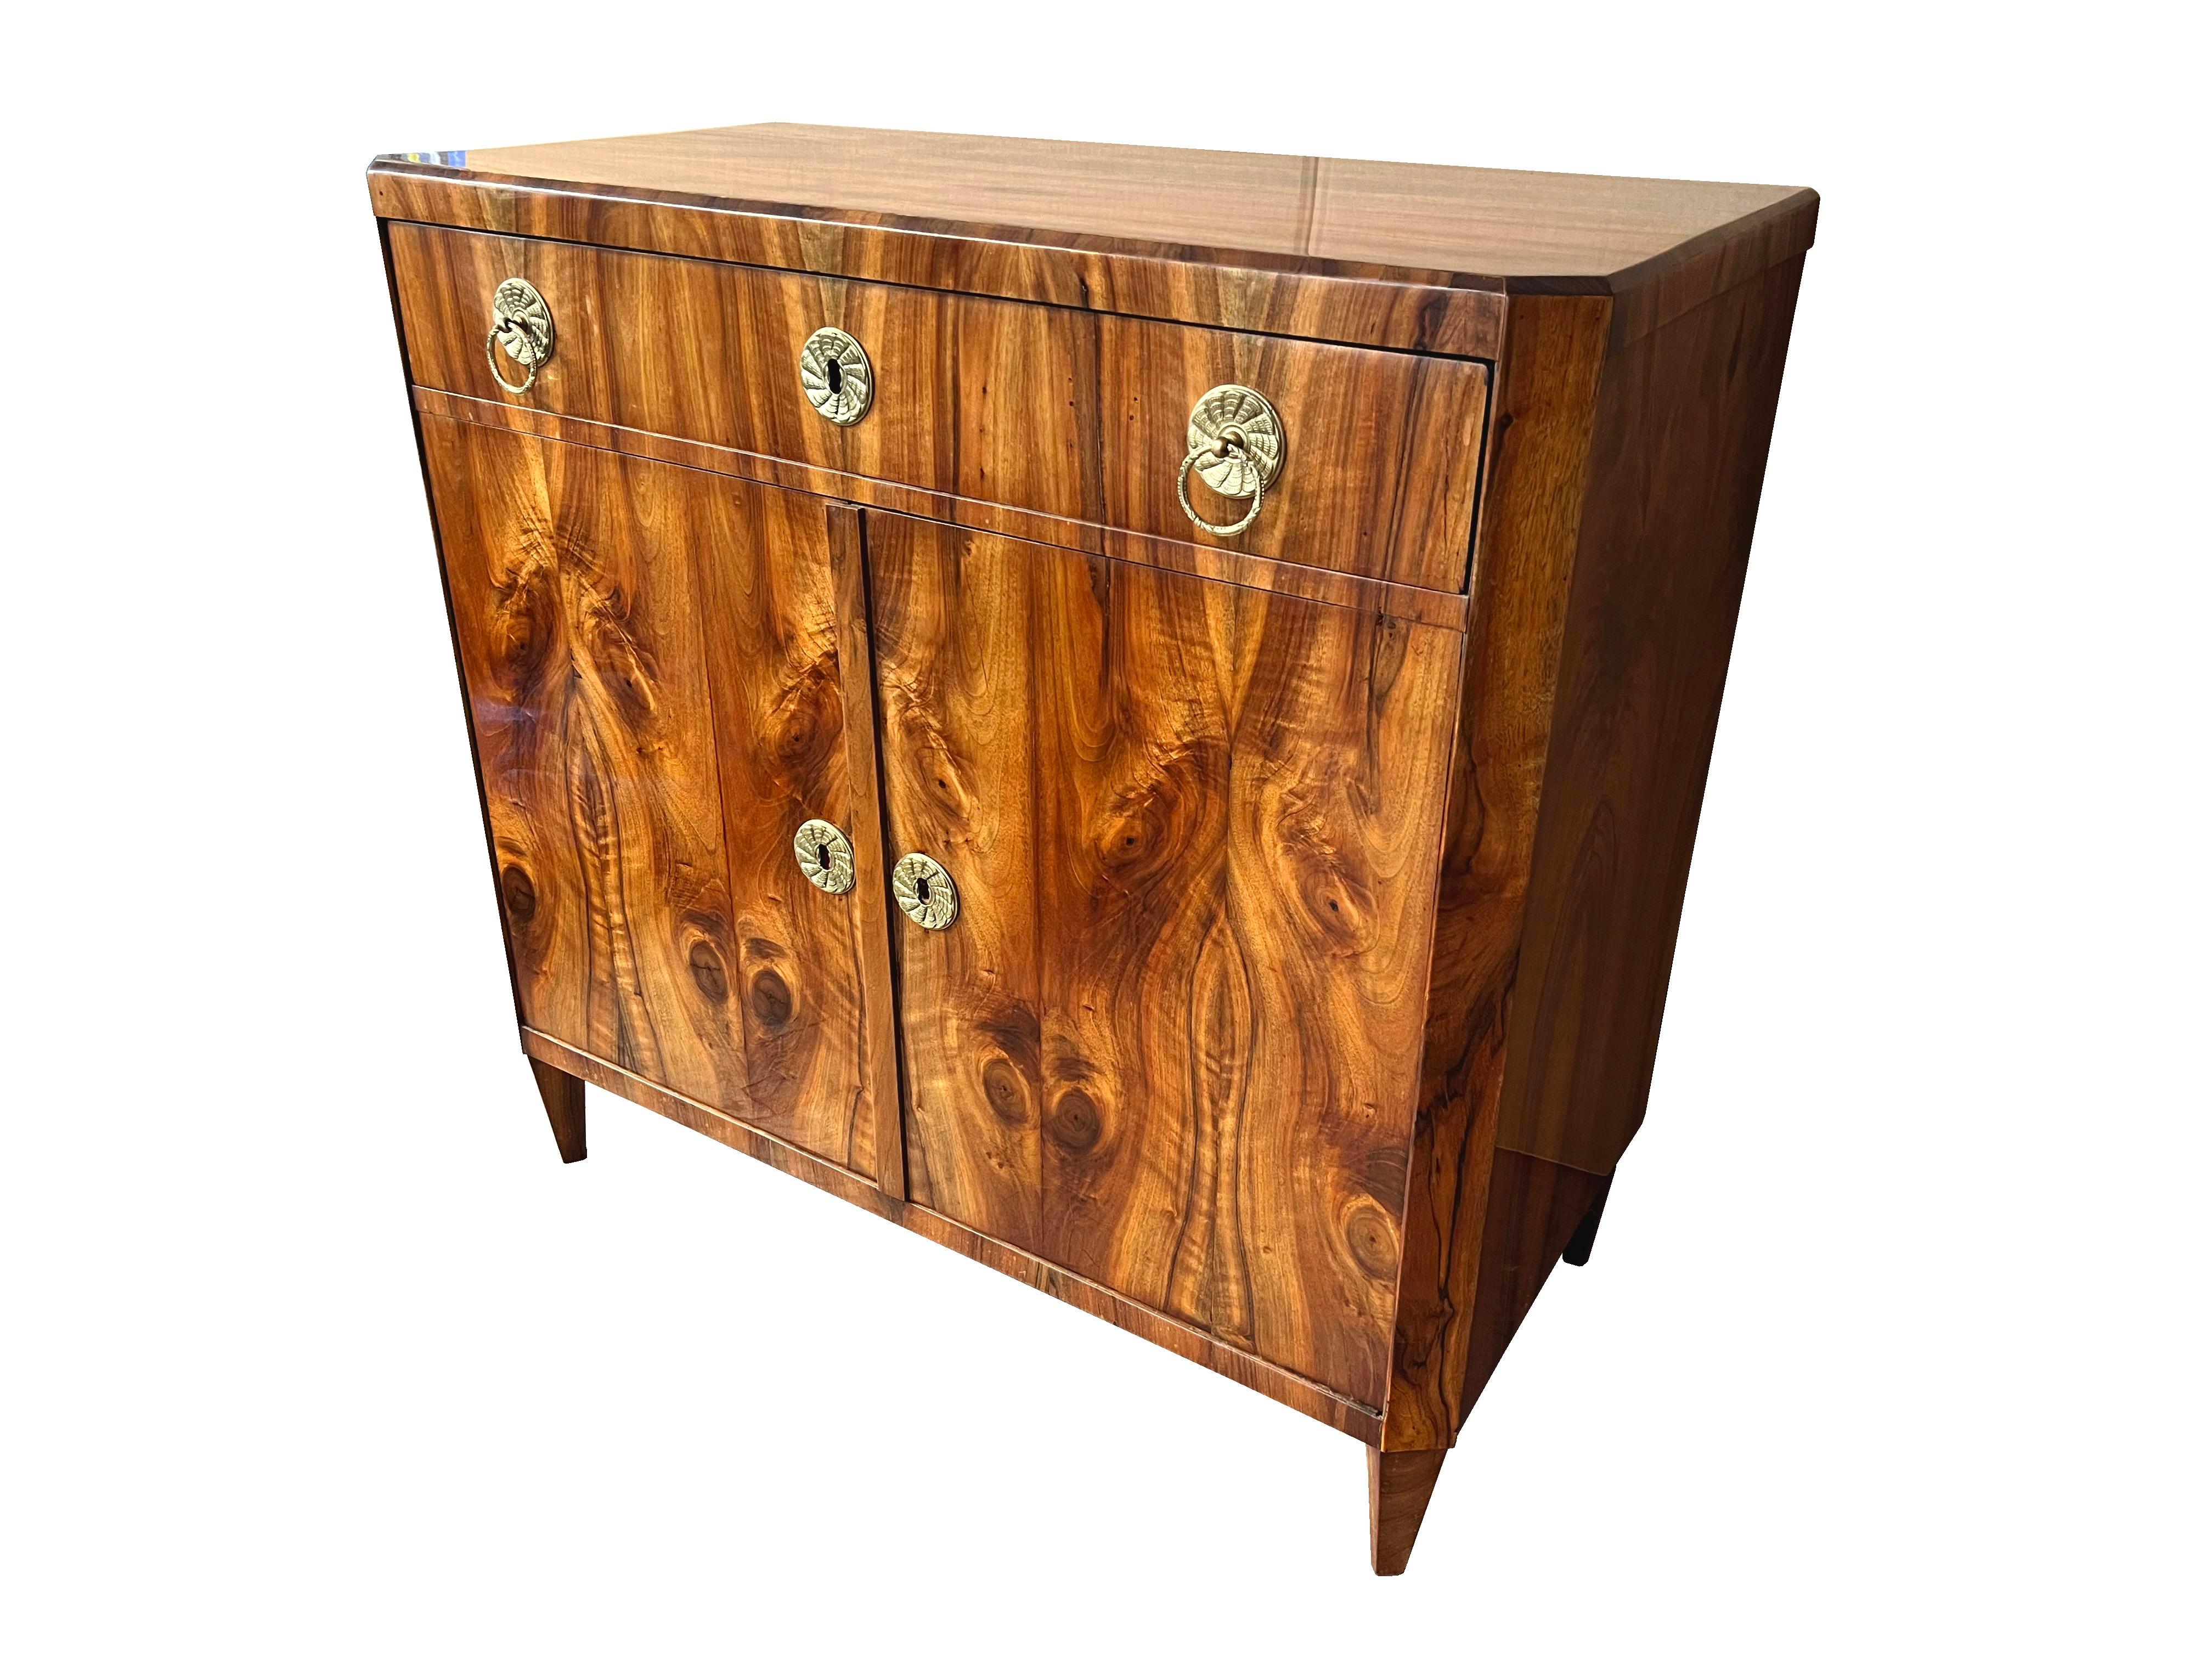 Hello,
This fine Biedermeier walnut trumeau chest is the best example of top-quality Viennese piece from circa 1825.

Viennese Biedermeier is distinguished by their sophisticated proportions, rare and refined design and excellent craftsmanship and